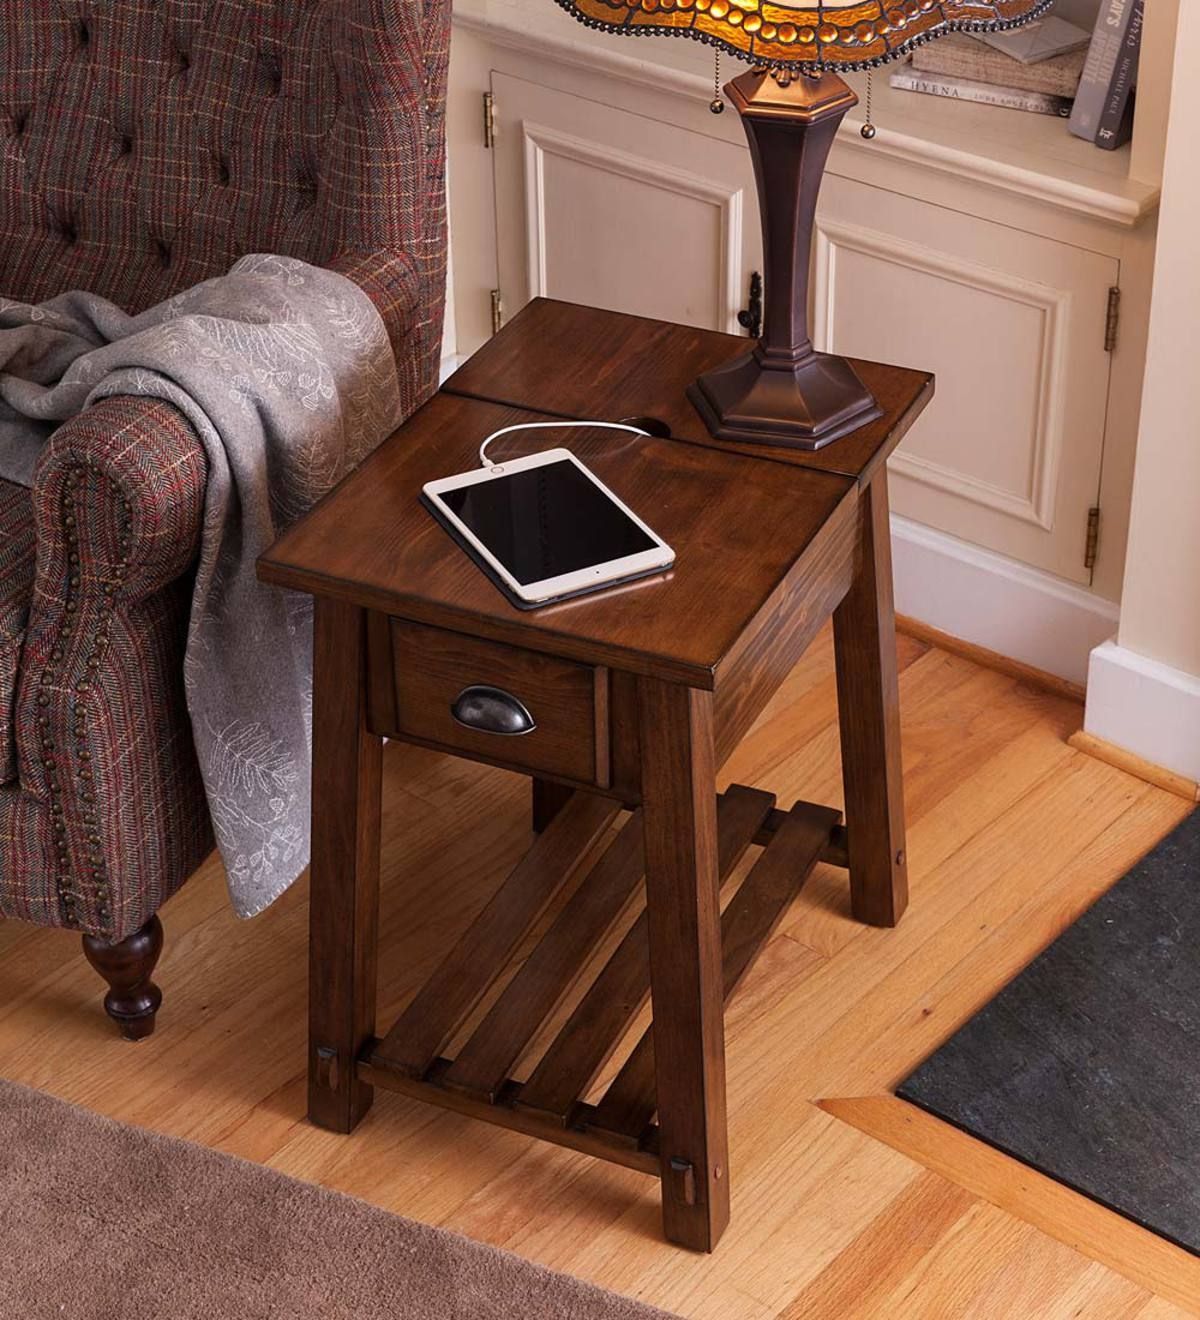 End Table With Charging Station – Visualhunt Intended For Coffee Tables With Charging Station (View 4 of 20)